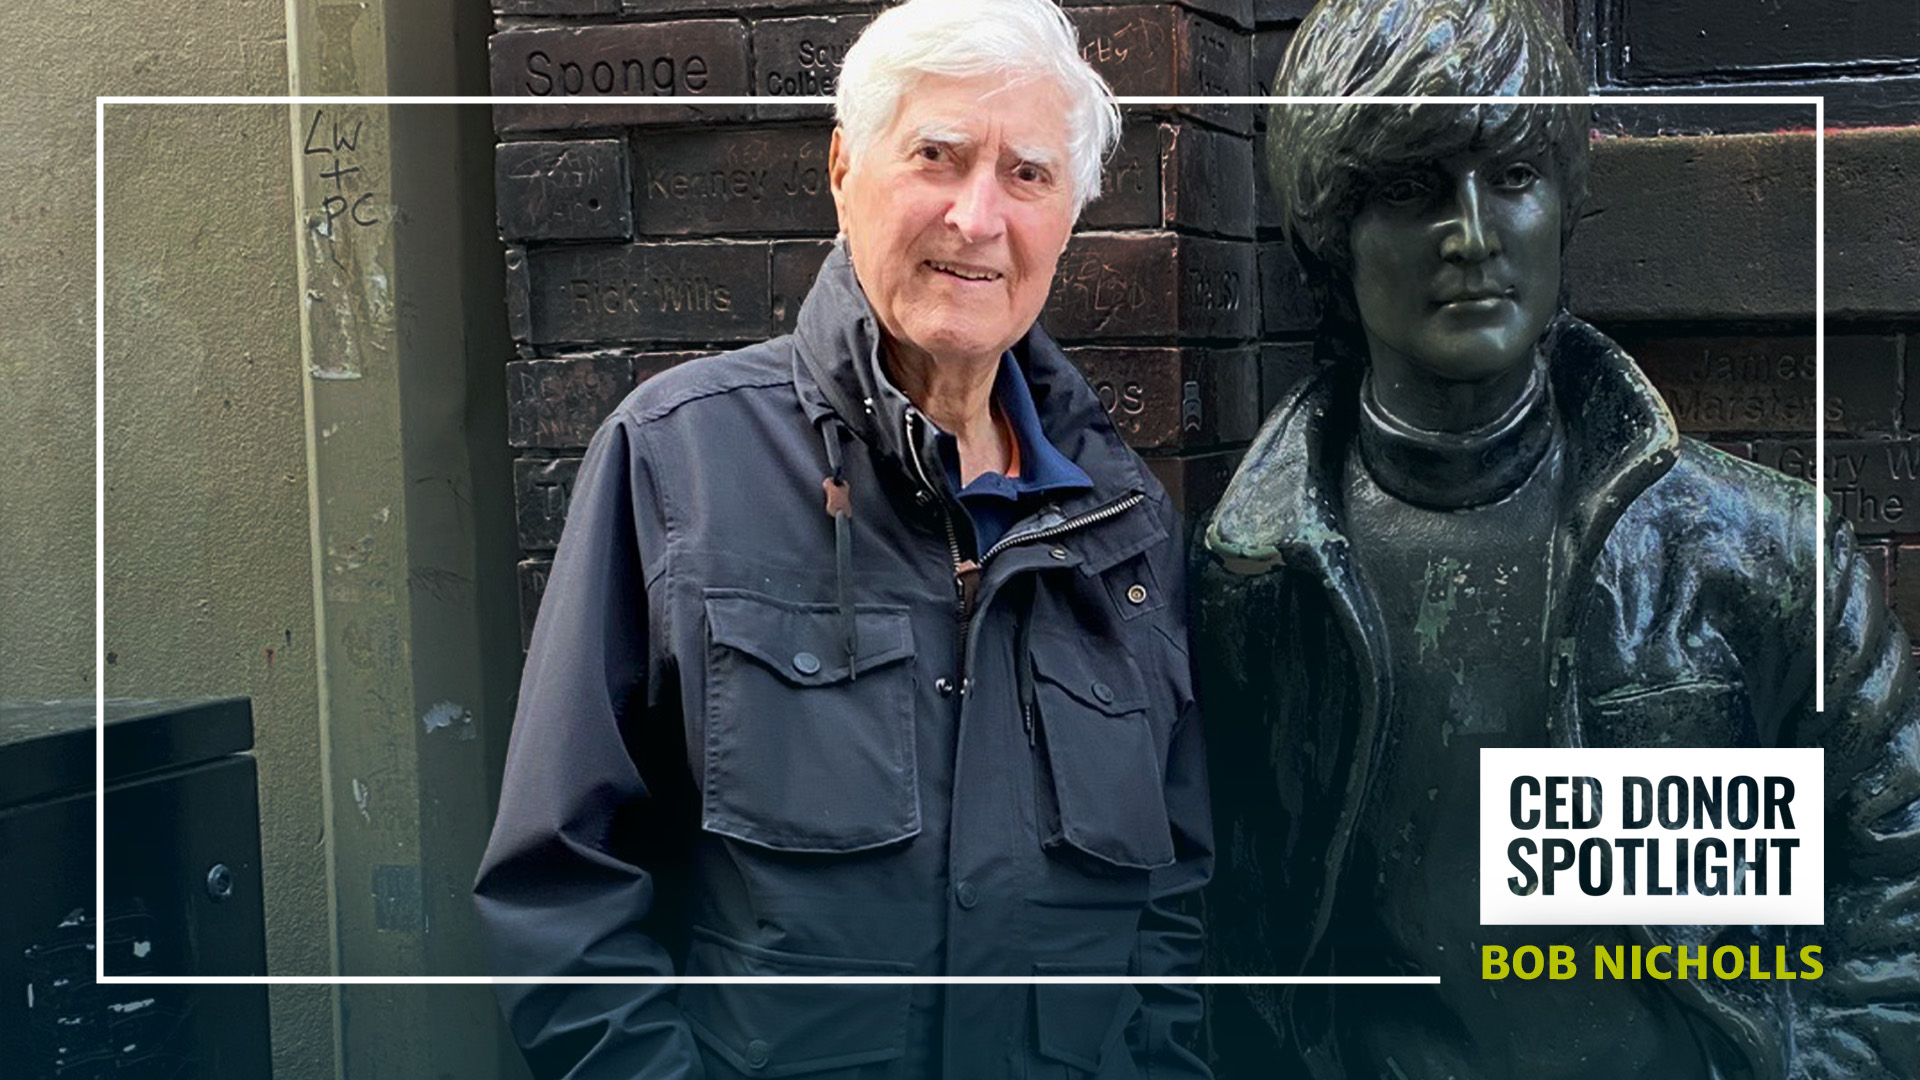 Bob Nicholls stands with a statue of John Lennon.